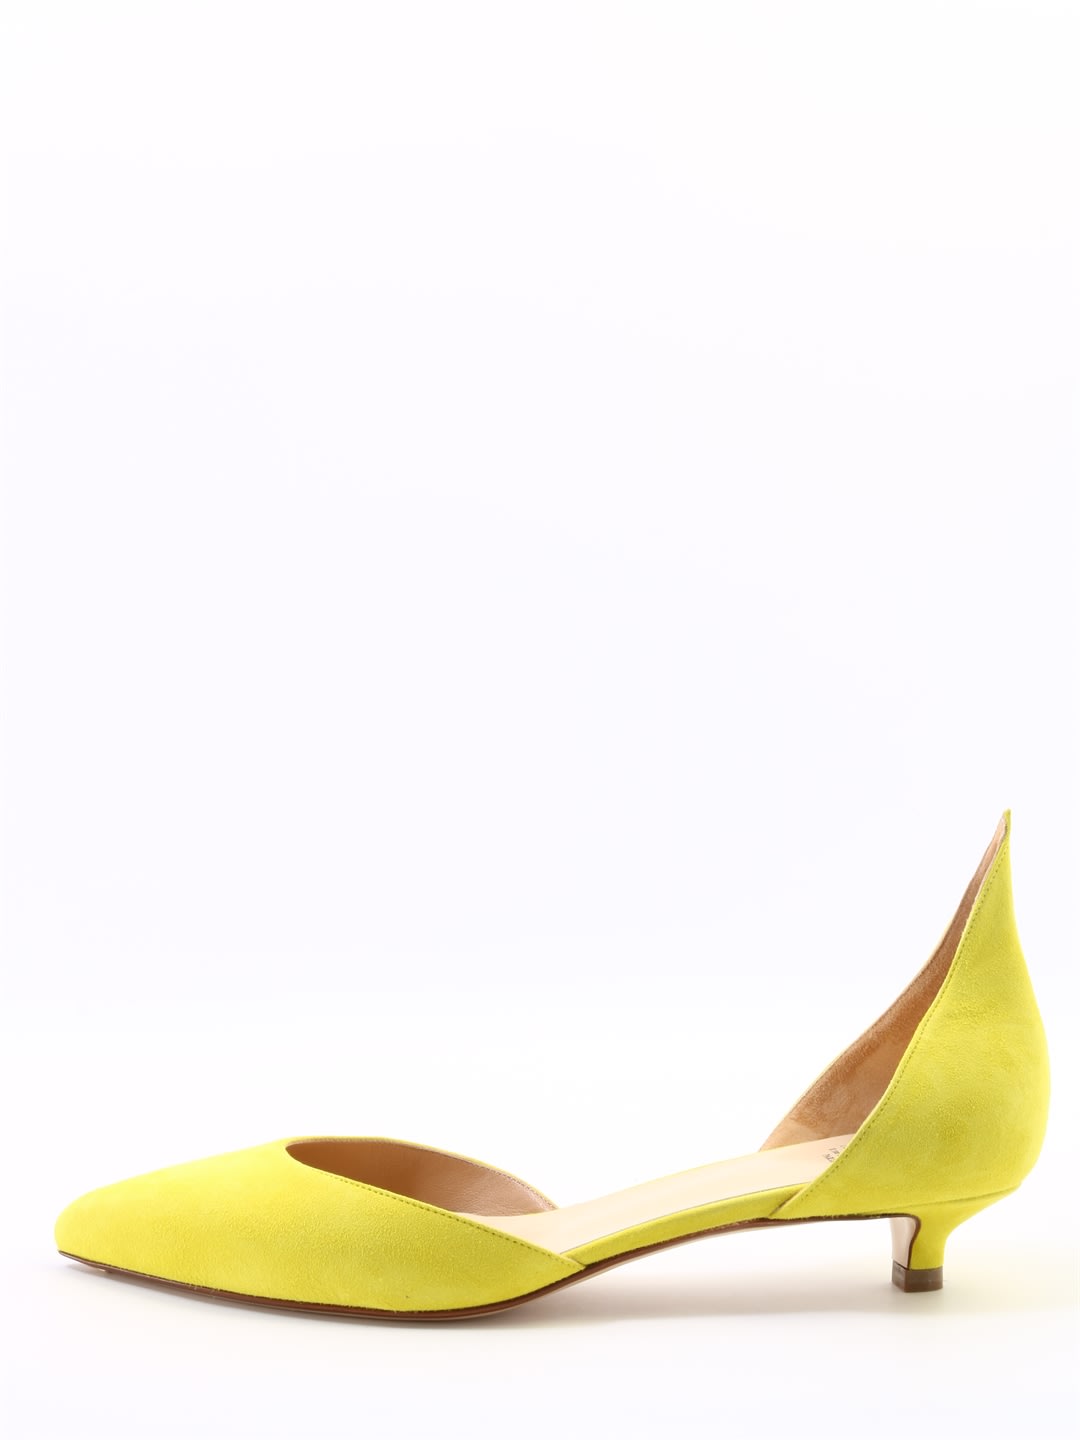 Buy Francesco Russo D?ollet?Suede Lime online, shop Francesco Russo shoes with free shipping